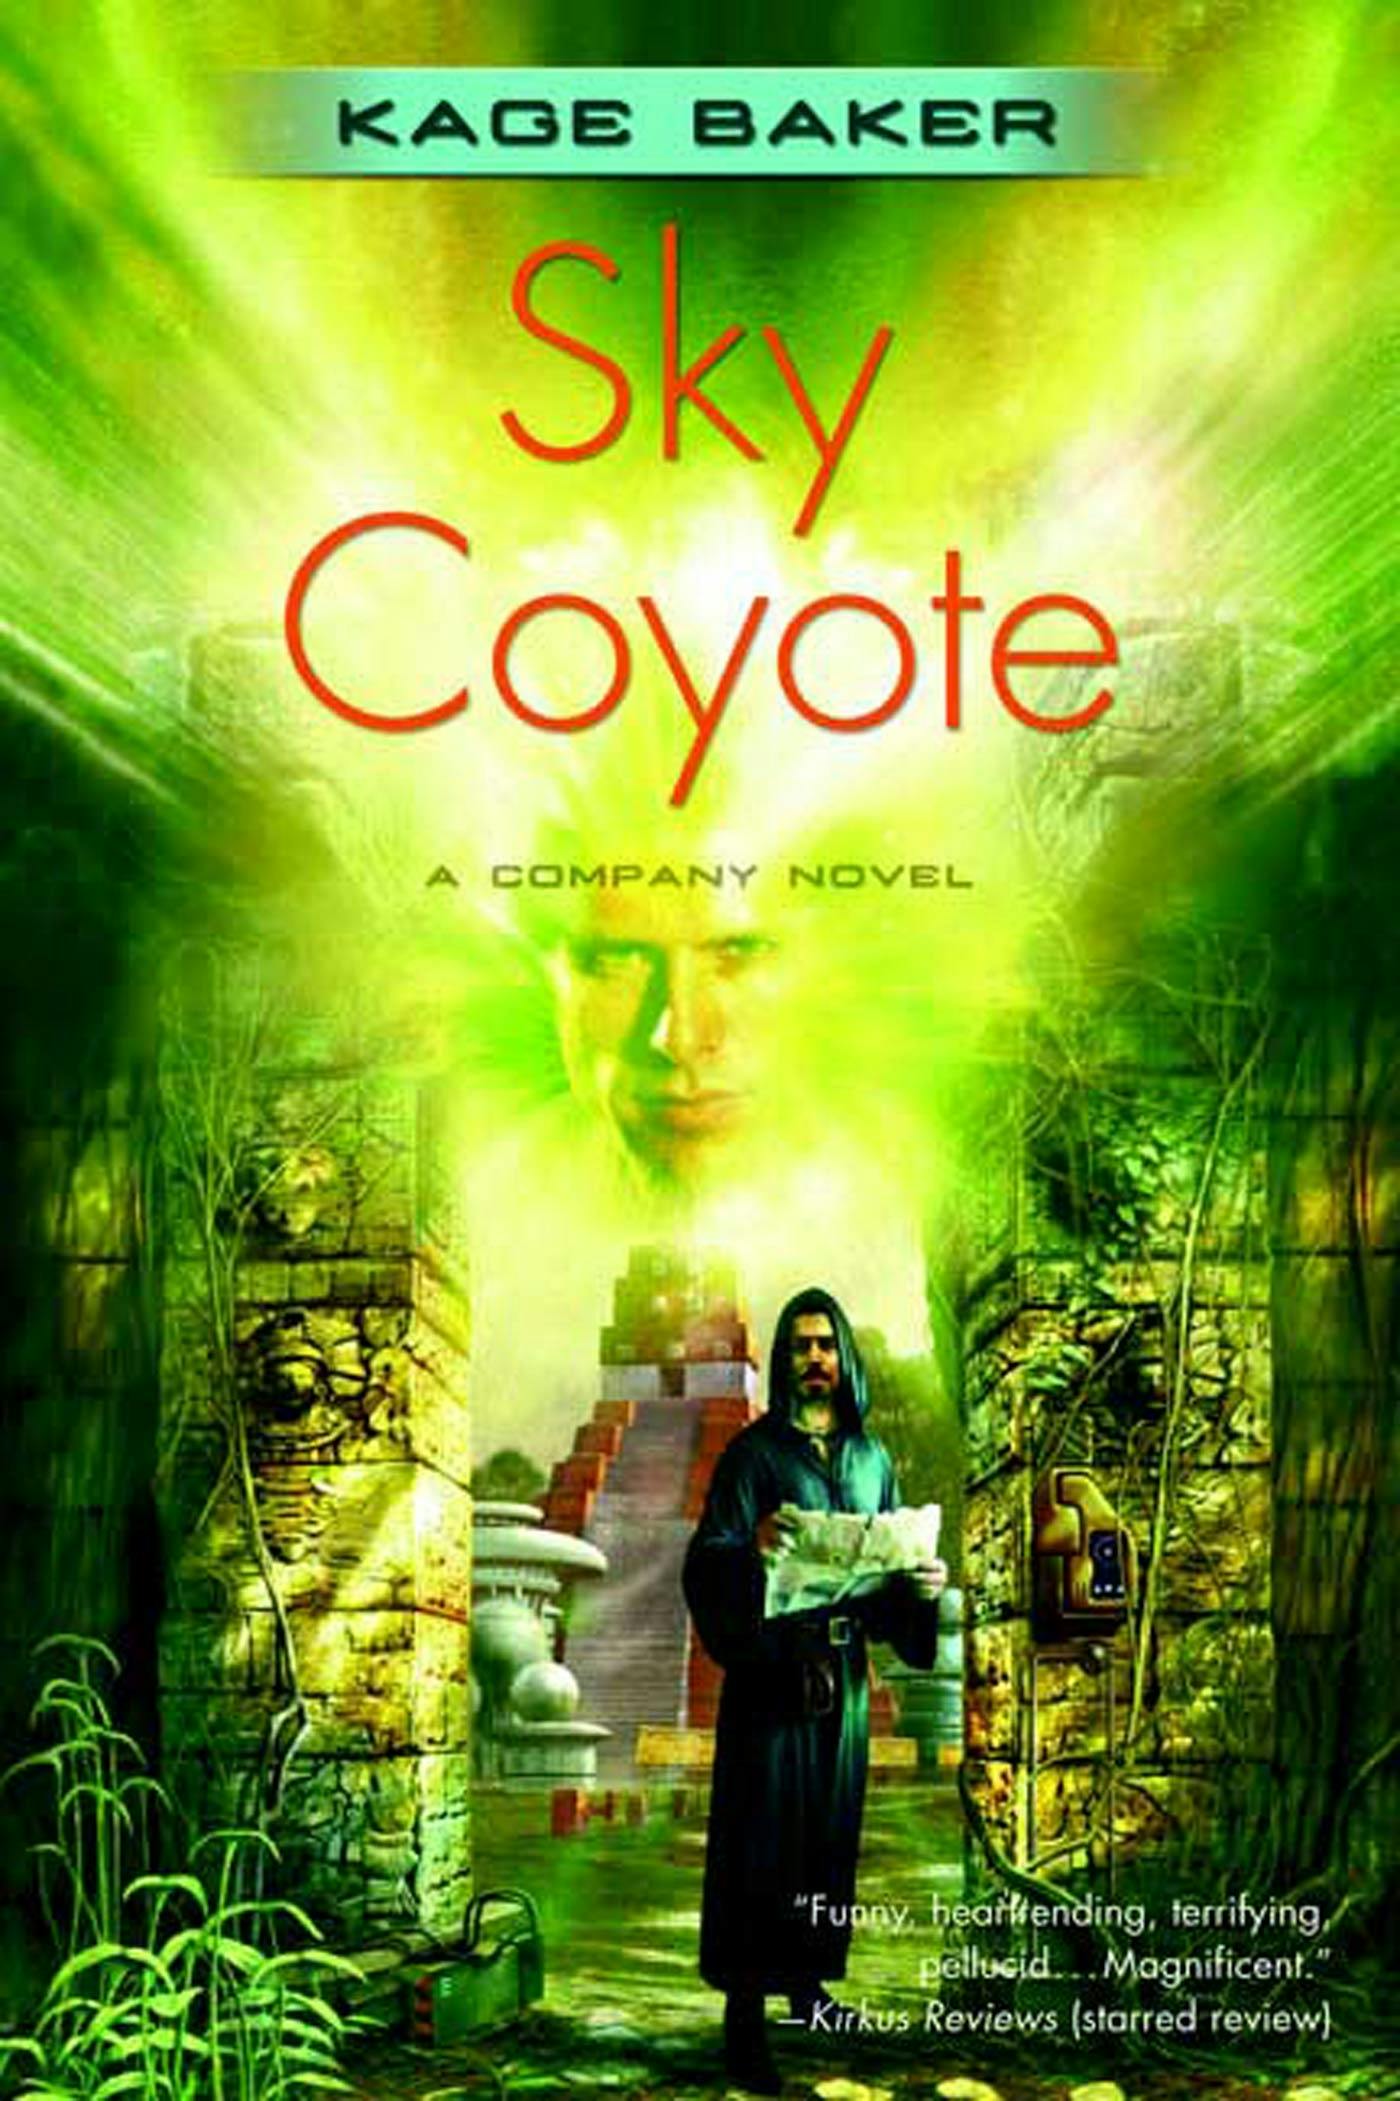 Cover for the book titled as: Sky Coyote